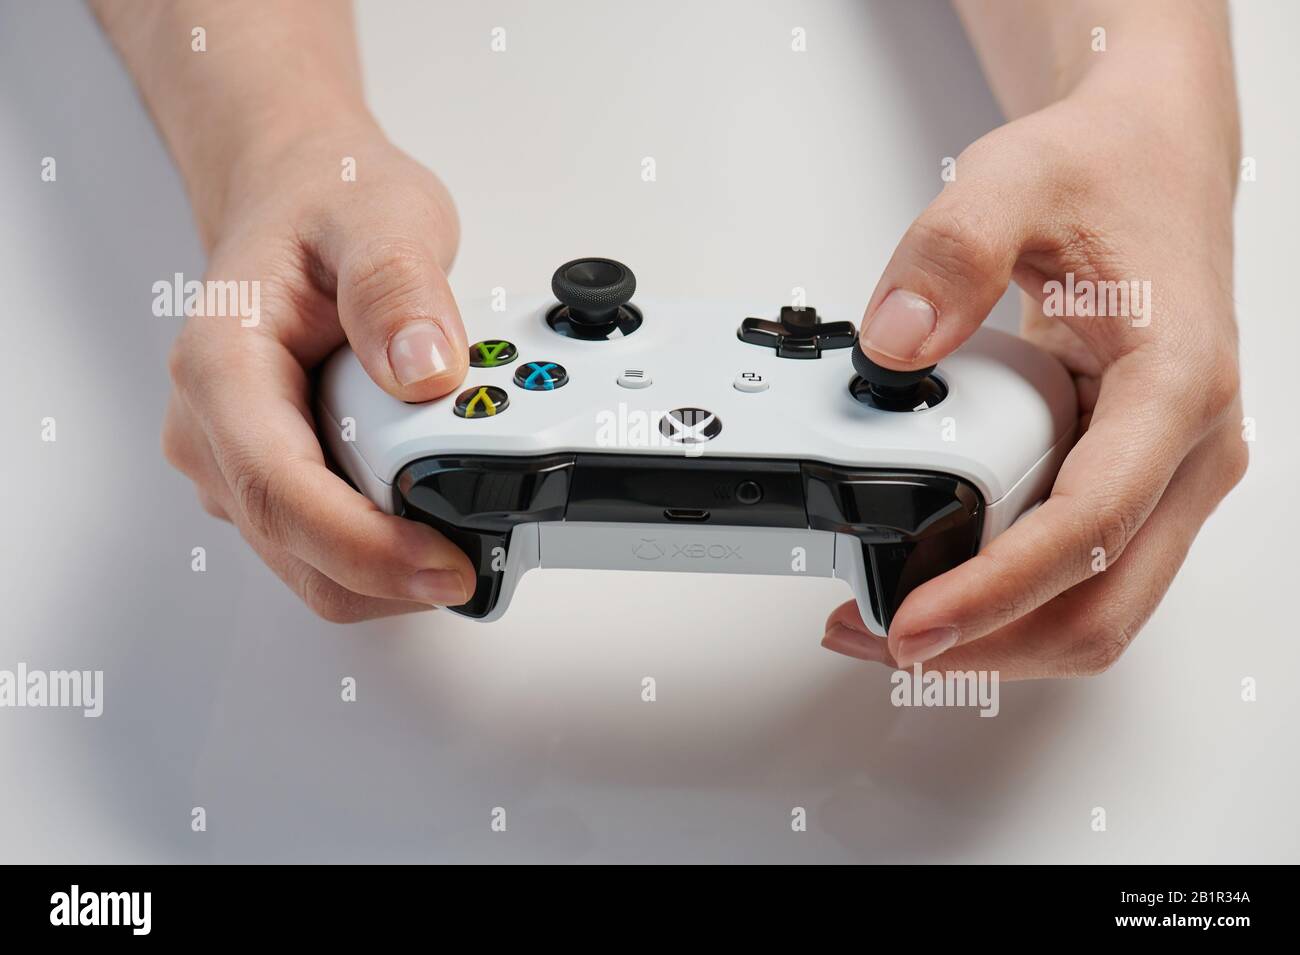 Page 3 - Playing Xbox High Resolution Stock Photography and Images - Alamy